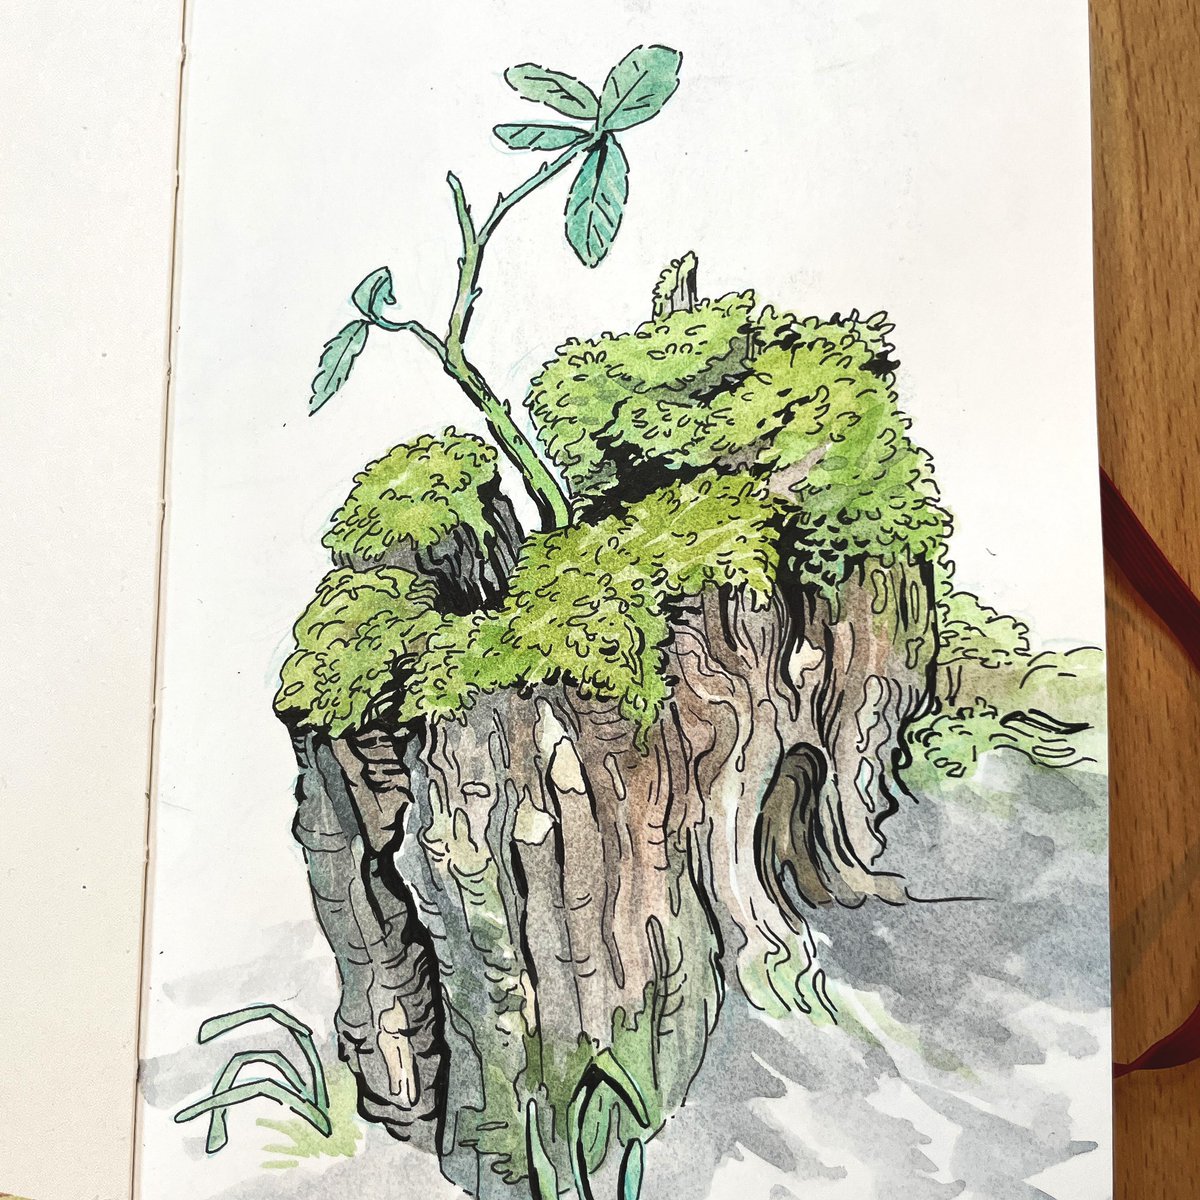 Tree stumps: the colored one is a study from a photo I took, the other ones are from imagination 🌱

Do you enjoy drawing from reference or imagination more?

#sketch #sketchbook #inkdrawing #natureart #illustration #draw #natureillustration #tree #art #sketchdaily #overgrown